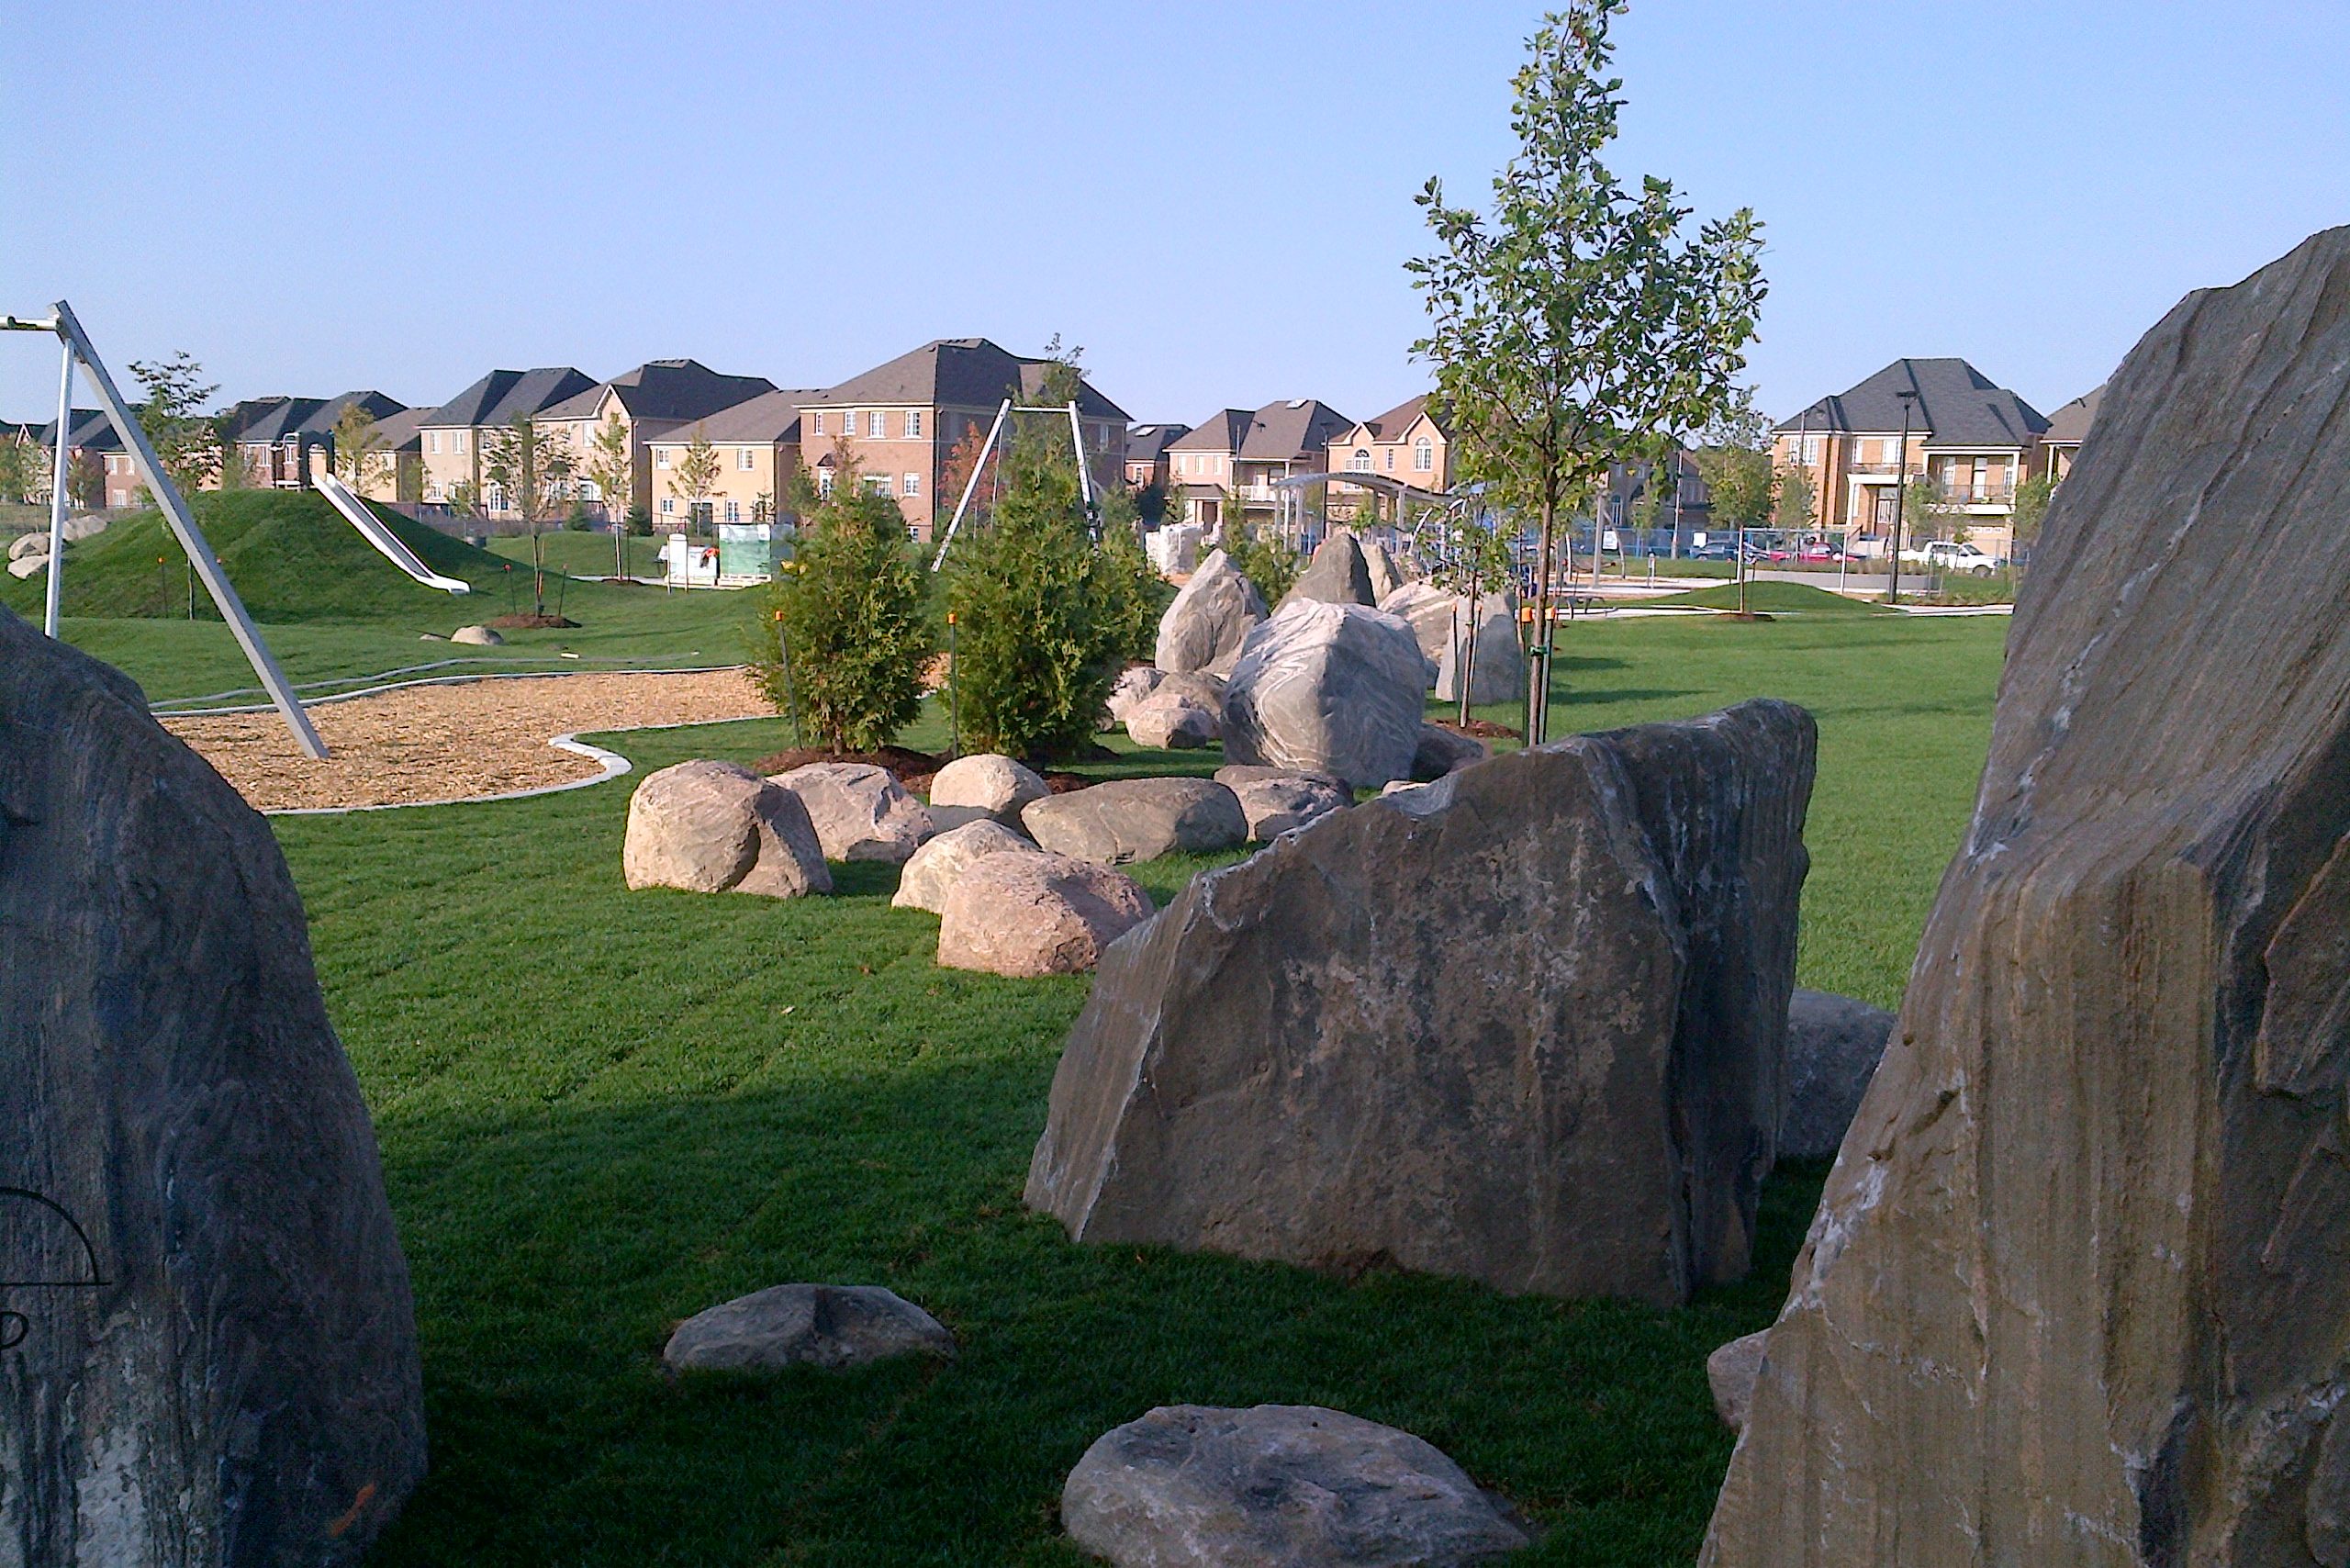 Large rocks with playground in background.